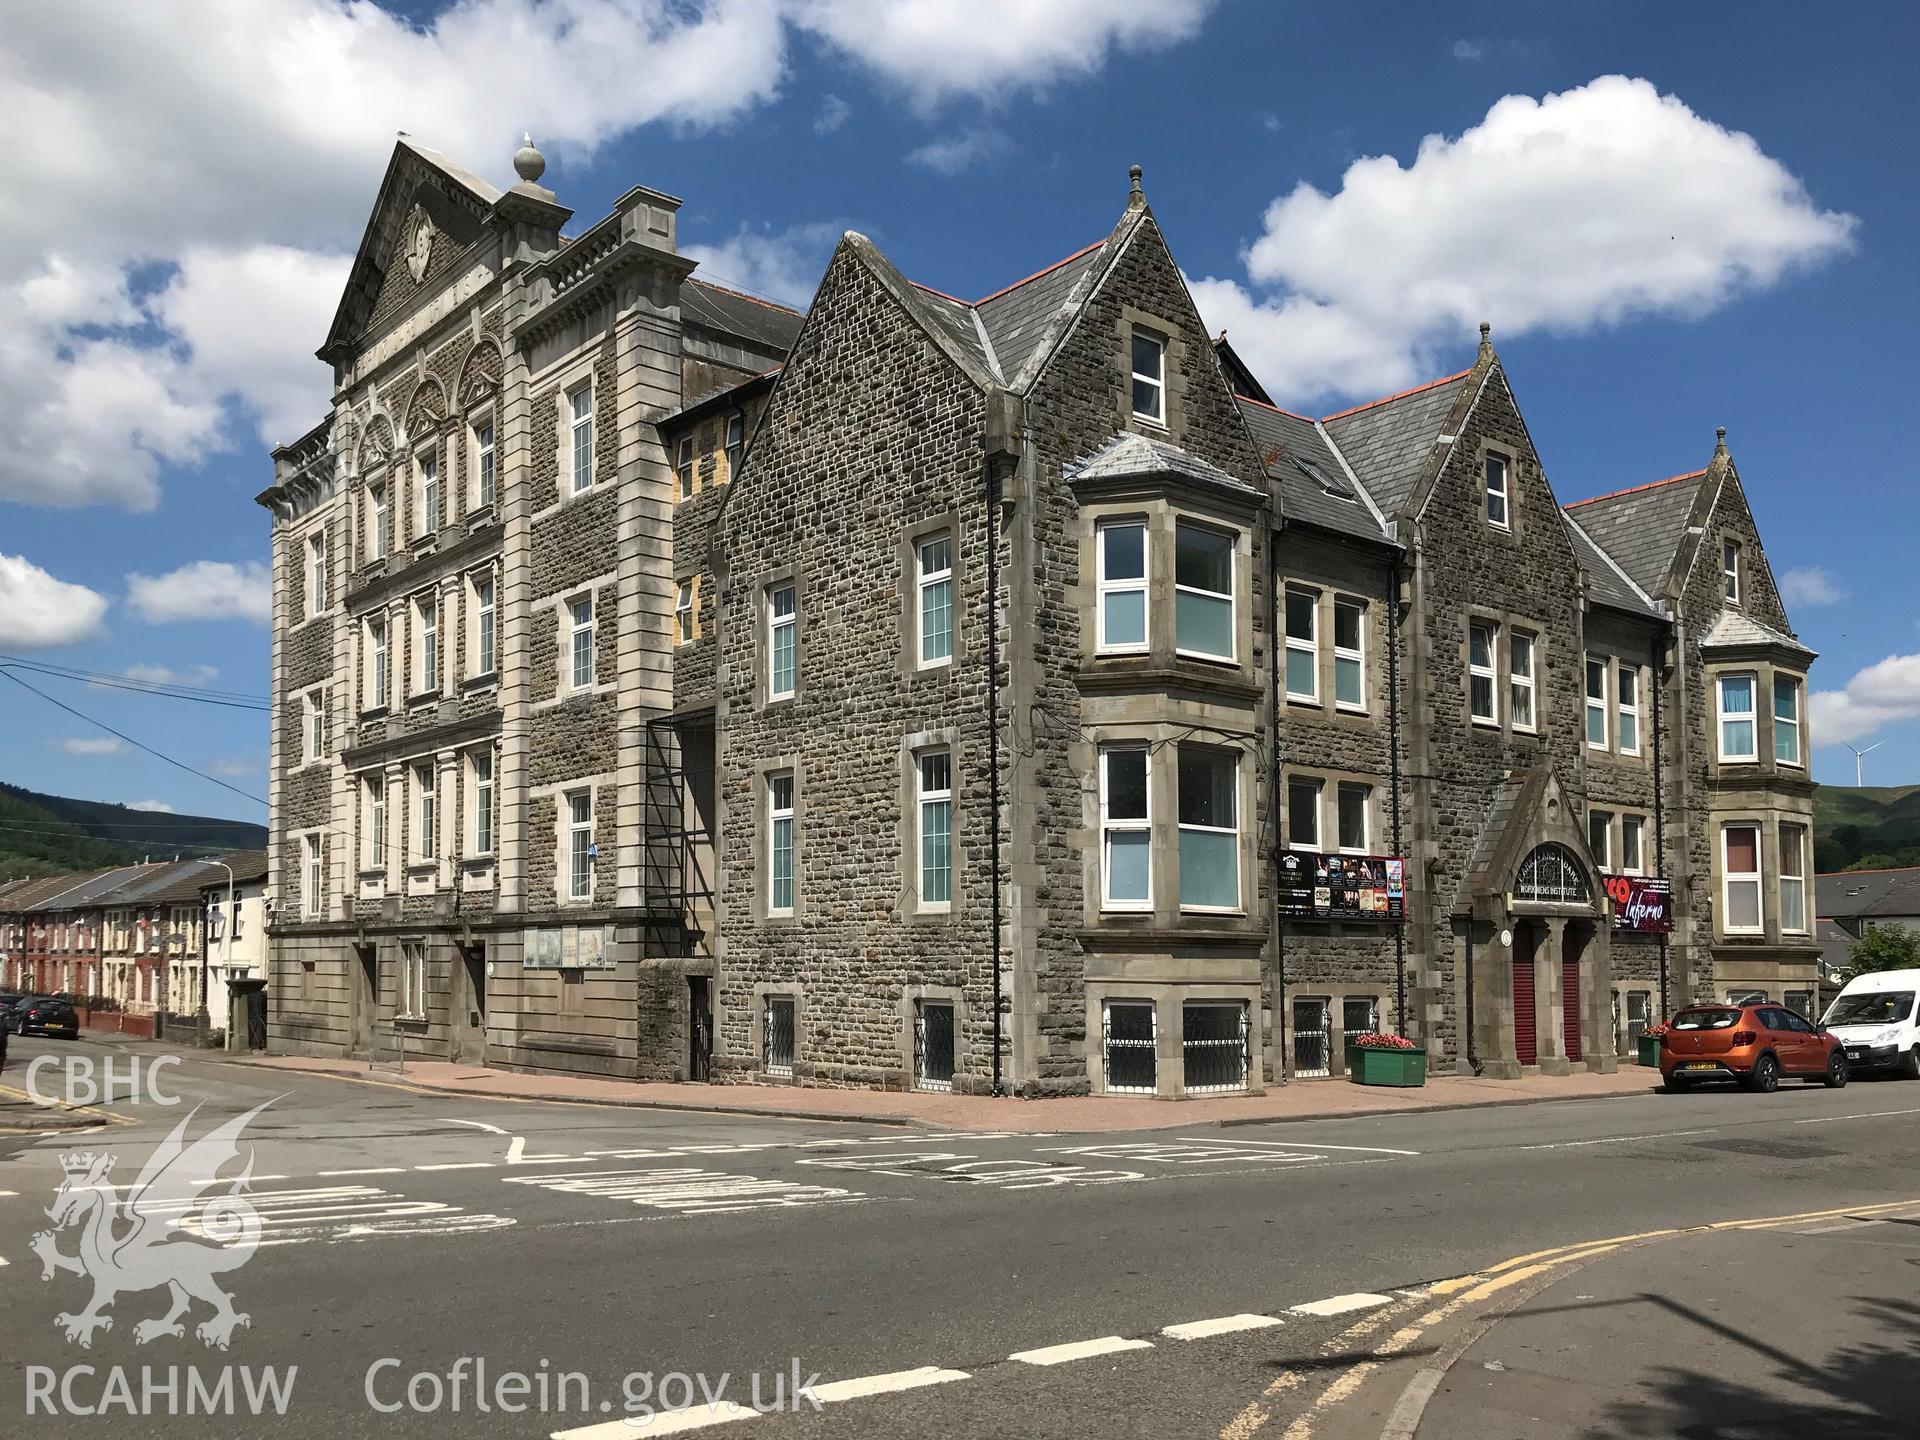 Exterior view of Parc and Dare Workmen's Hall and Institute, now Park and Dare Theatre, Treorchy. Colour photograph taken by Paul R. Davis on 8th July 2018.